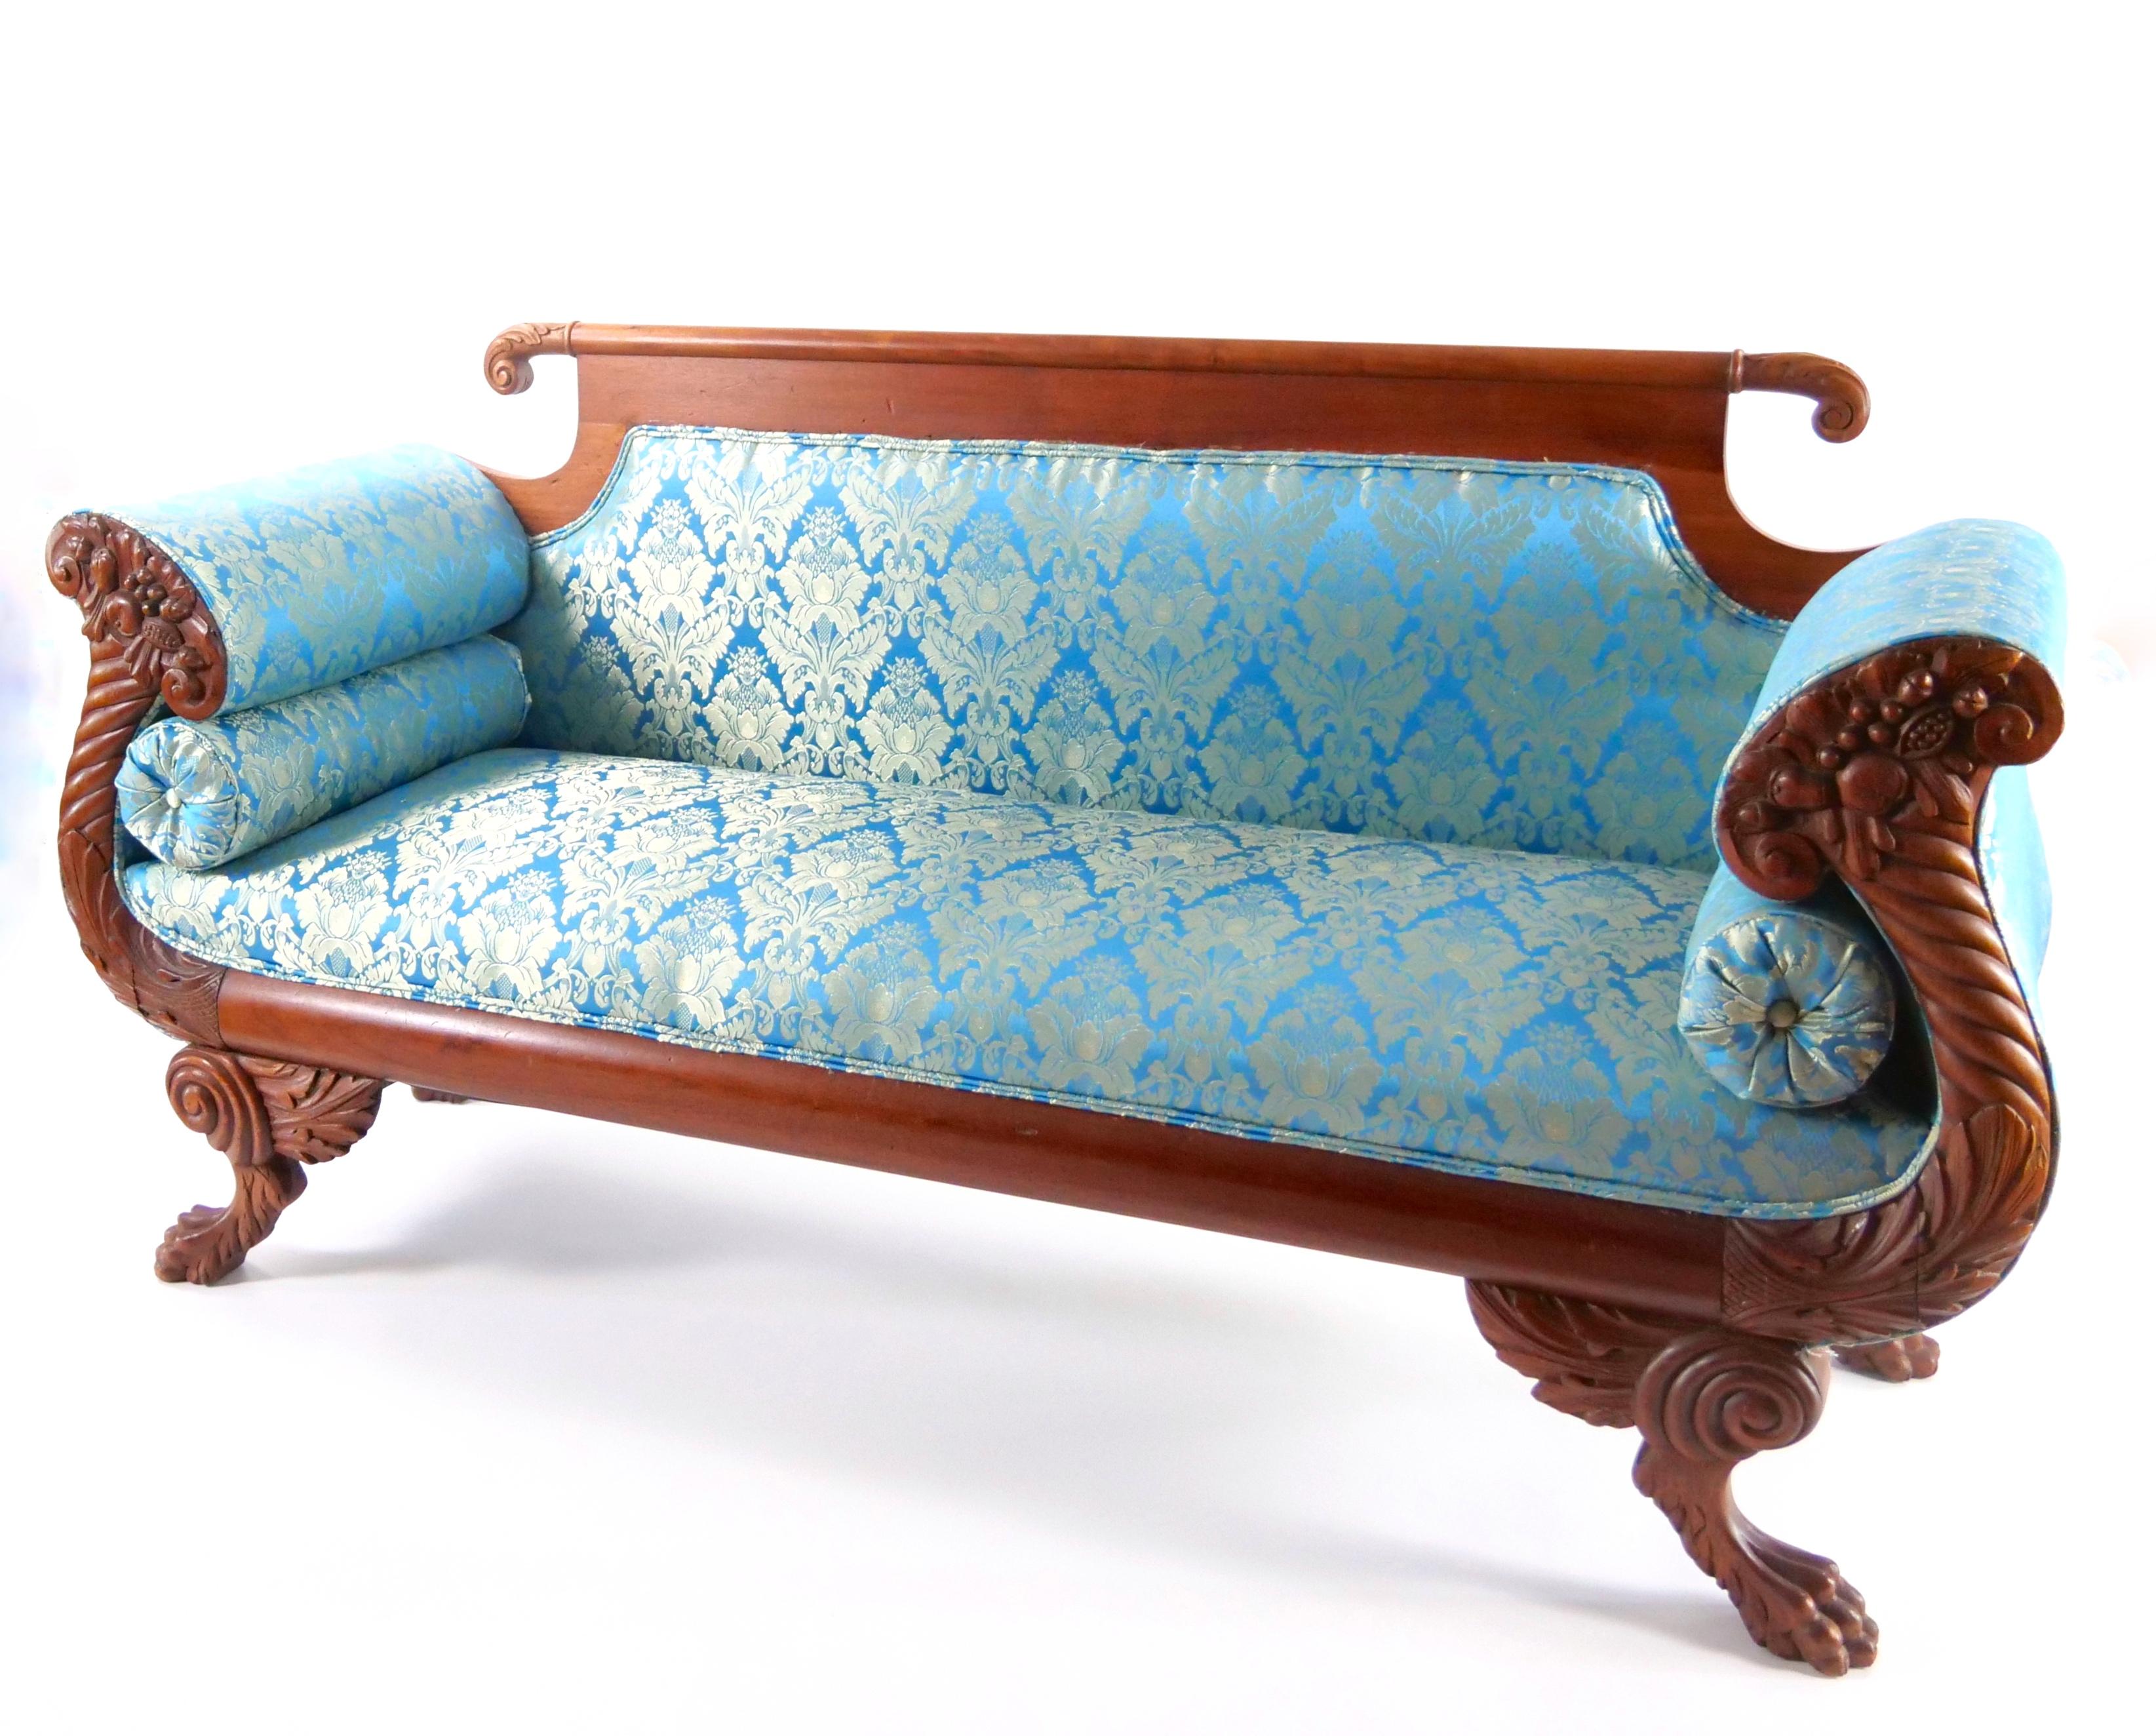 Immerse yourself in the charm of the 19th Century with our magnificent Mahogany Wood Framed Empire Style North American Sofa. This embodiment of timeless elegance boasts an Empire style design, characterized by its opulent mahogany frame, scrolled